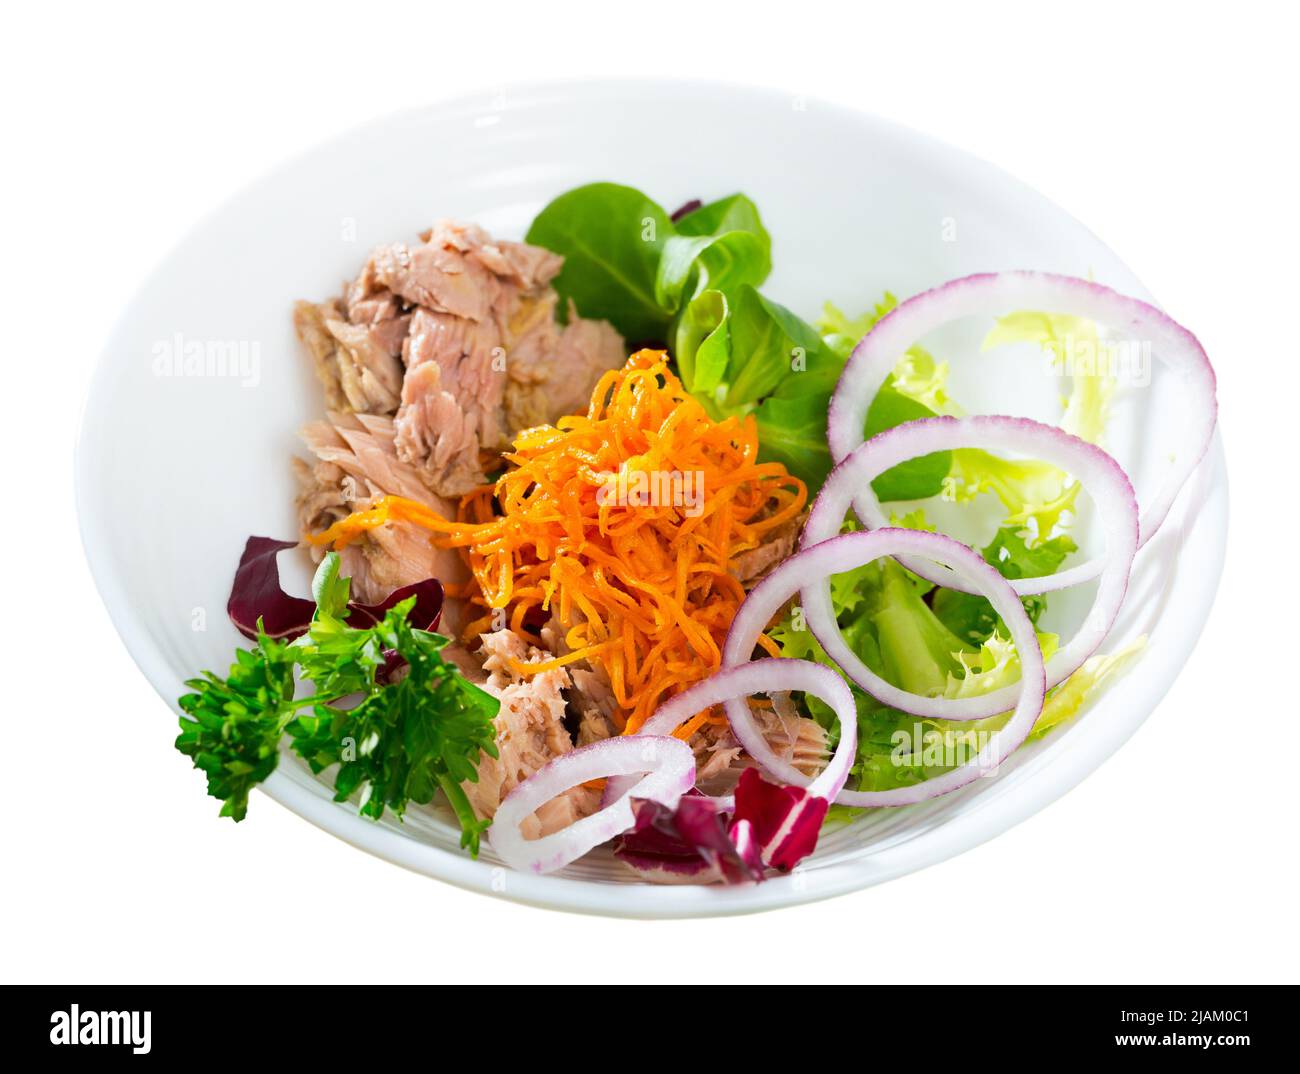 Salad of carrots with canned tuna, onion Stock Photo